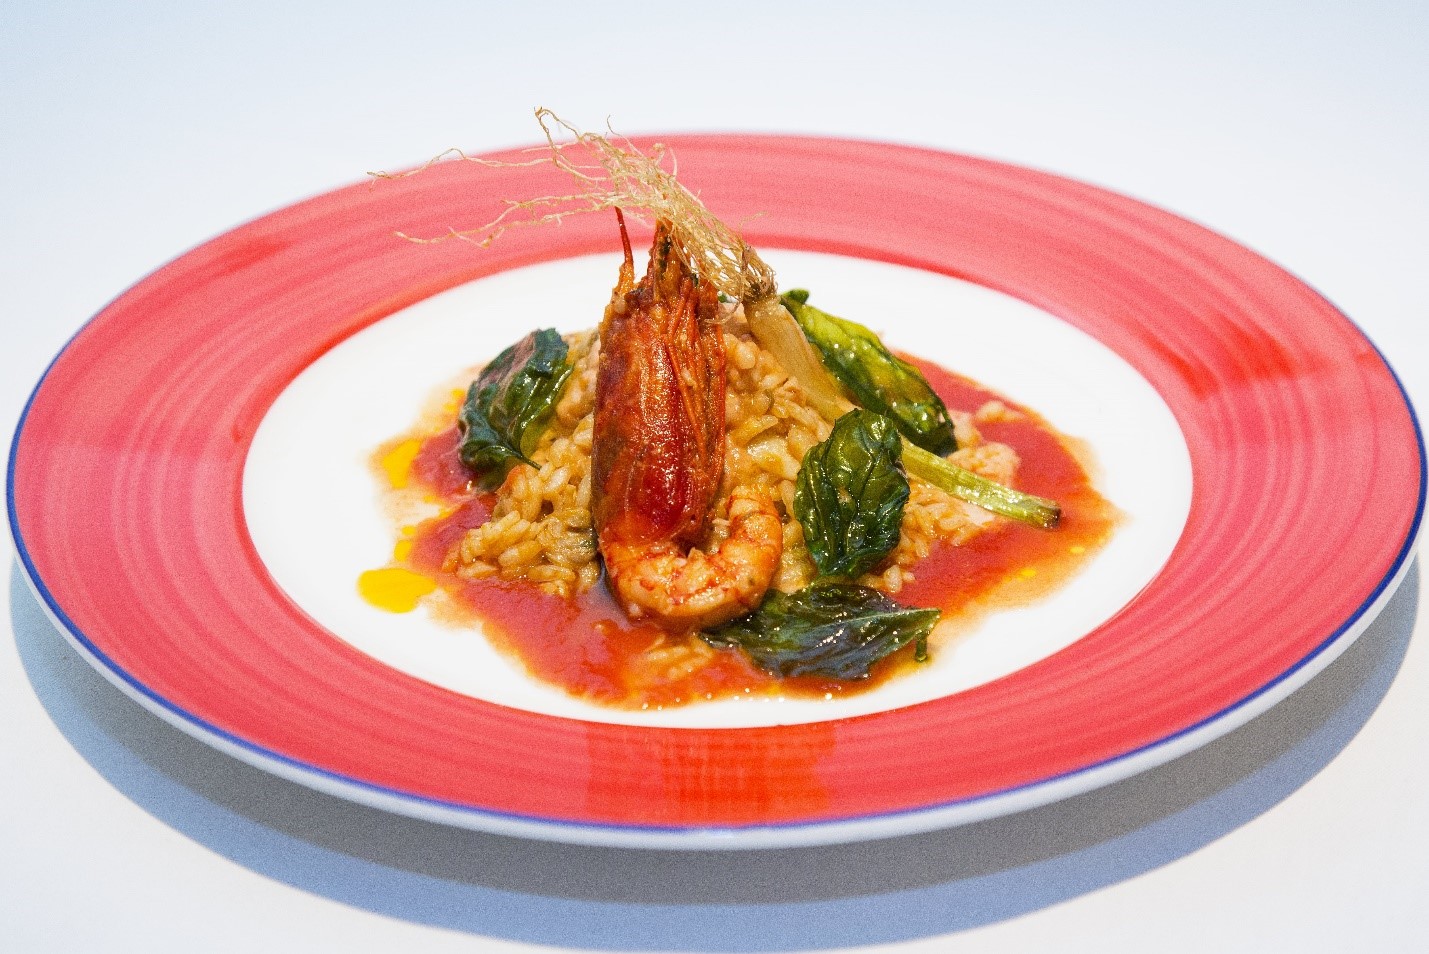 Tomato-red seafood risotto